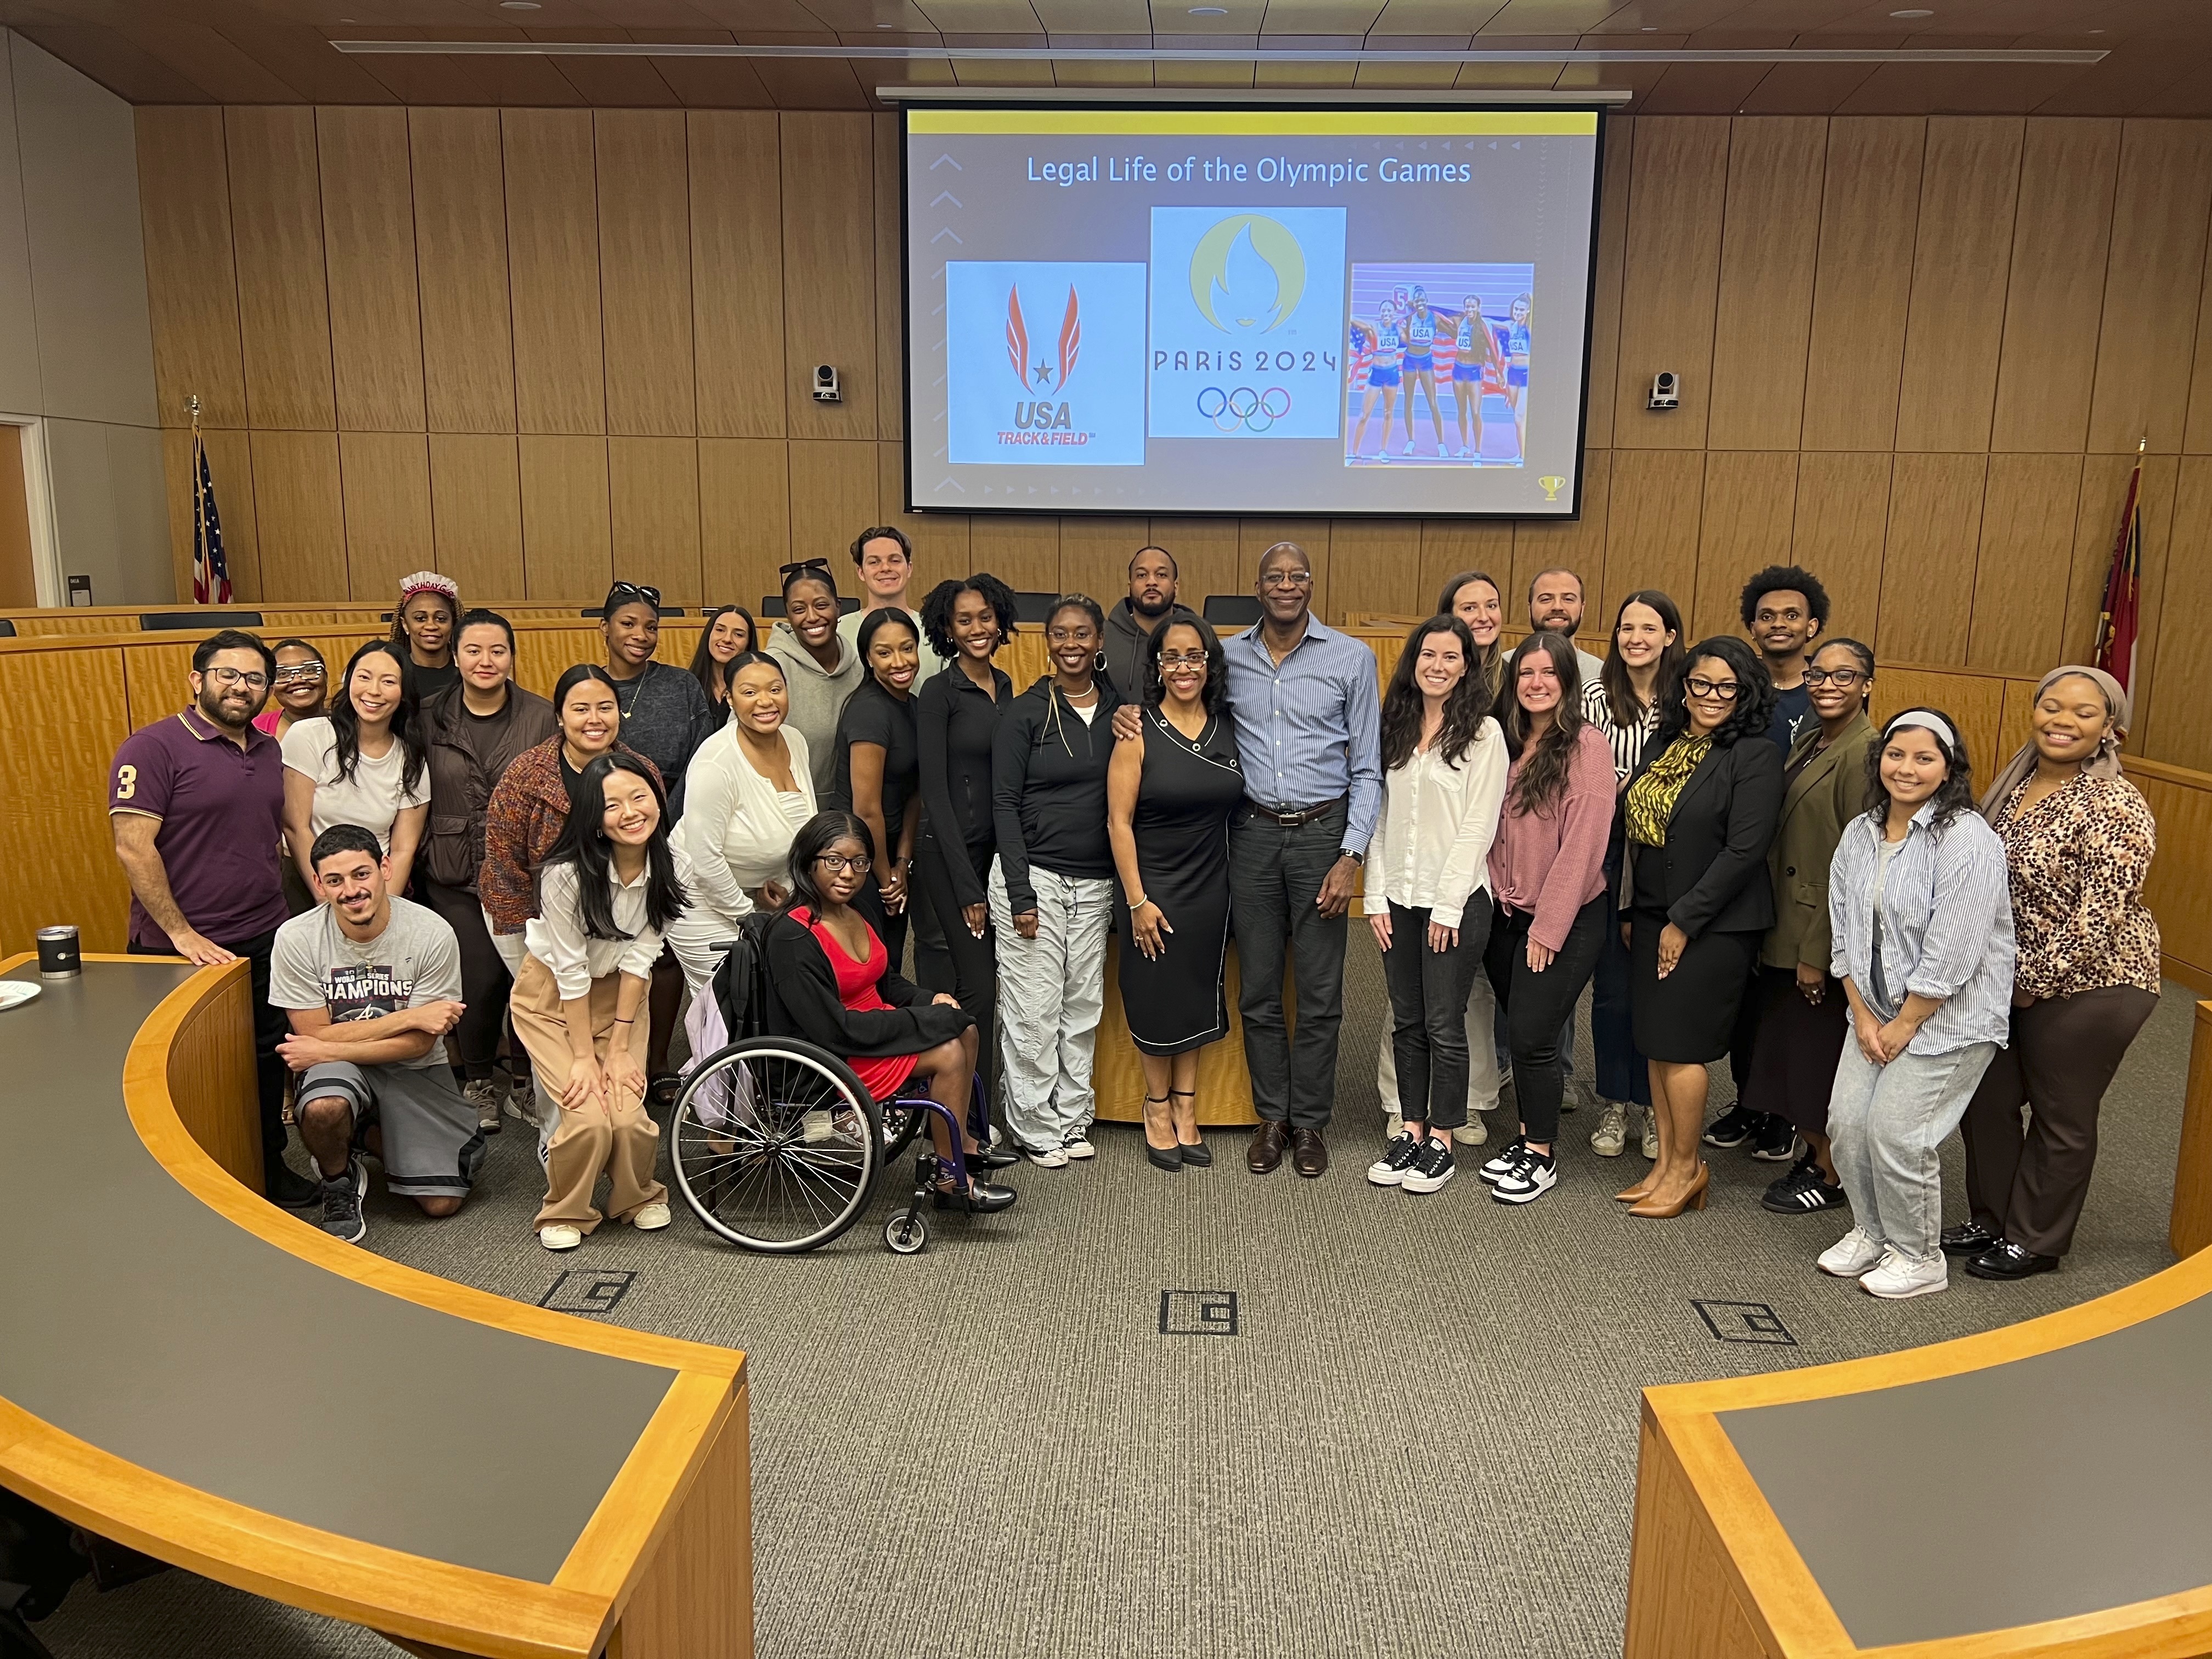 This image released by Georgia State University shows law professor Moraima “Mo” Ivory, center, left, posing with Olympian Edwin Moses, center, right, and her Legal Life class at Georgia State University in Atlanta. Ivory is known for bringing celebrities like Steve Harvey and Ludacris into her law class. But now she's taking her Atlanta law students on a free trip to the Paris Olympics this summer in hopes of creating real-life teachable moments. (Haley Austin/Georgia State University via AP)